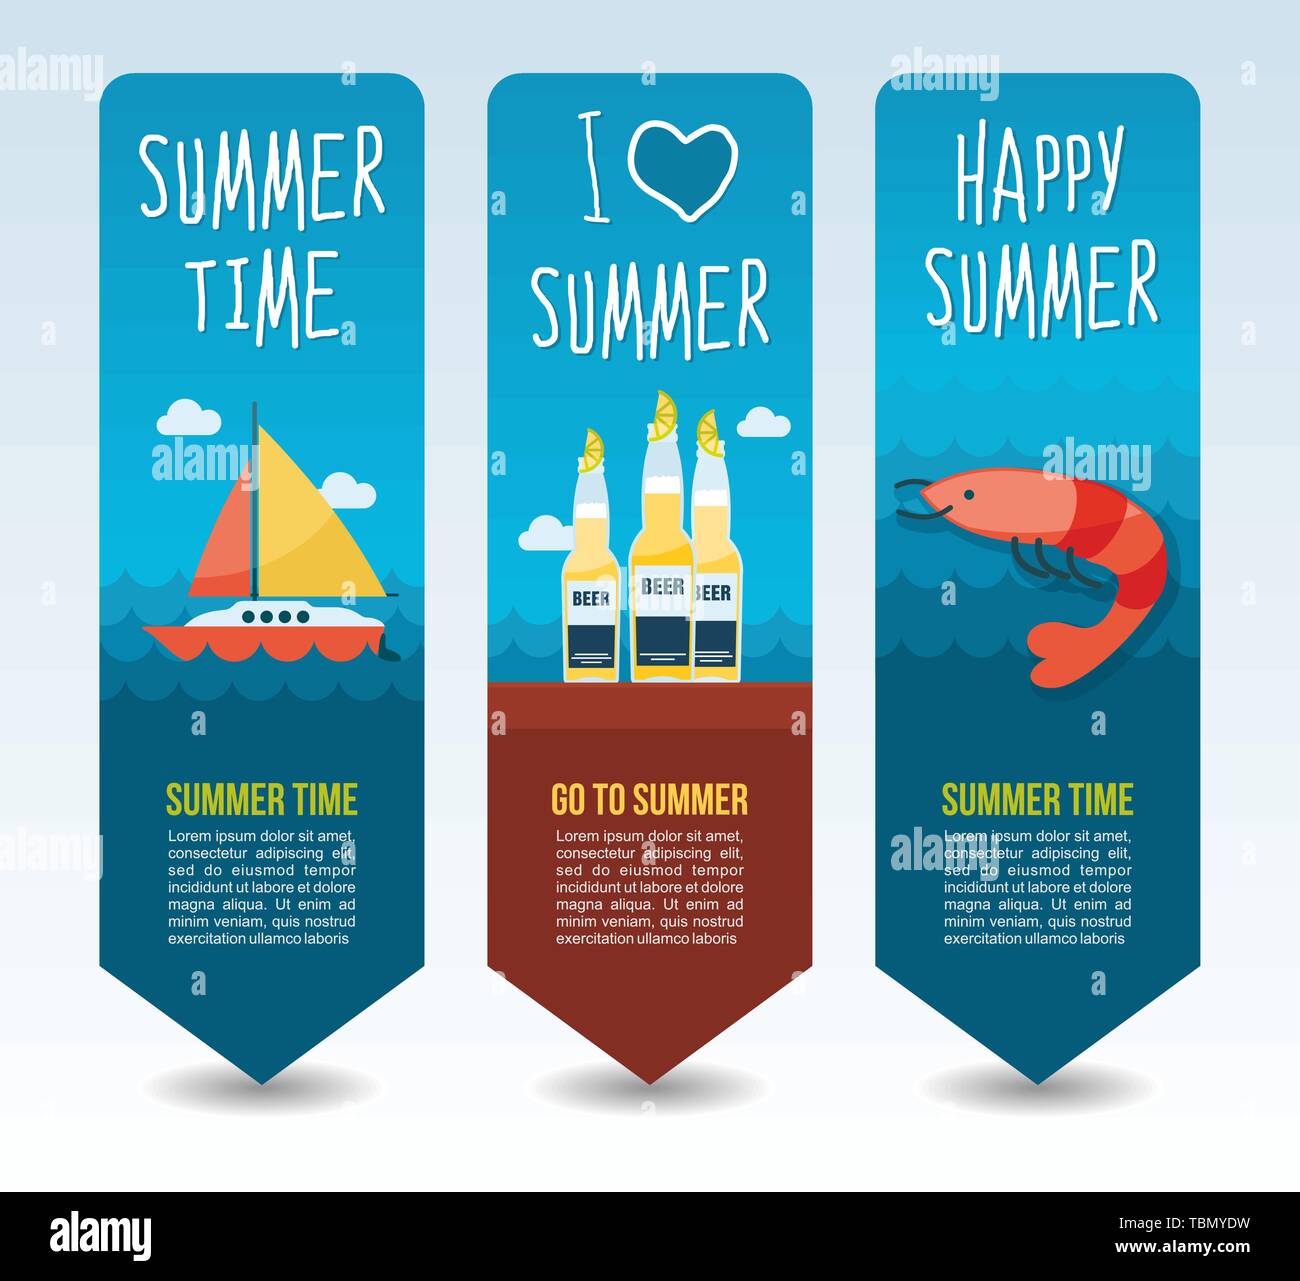 Sail boat, bottle beer and shrimp. Summer Travel and vacation vector banners. Summertime. Holiday Stock Vector